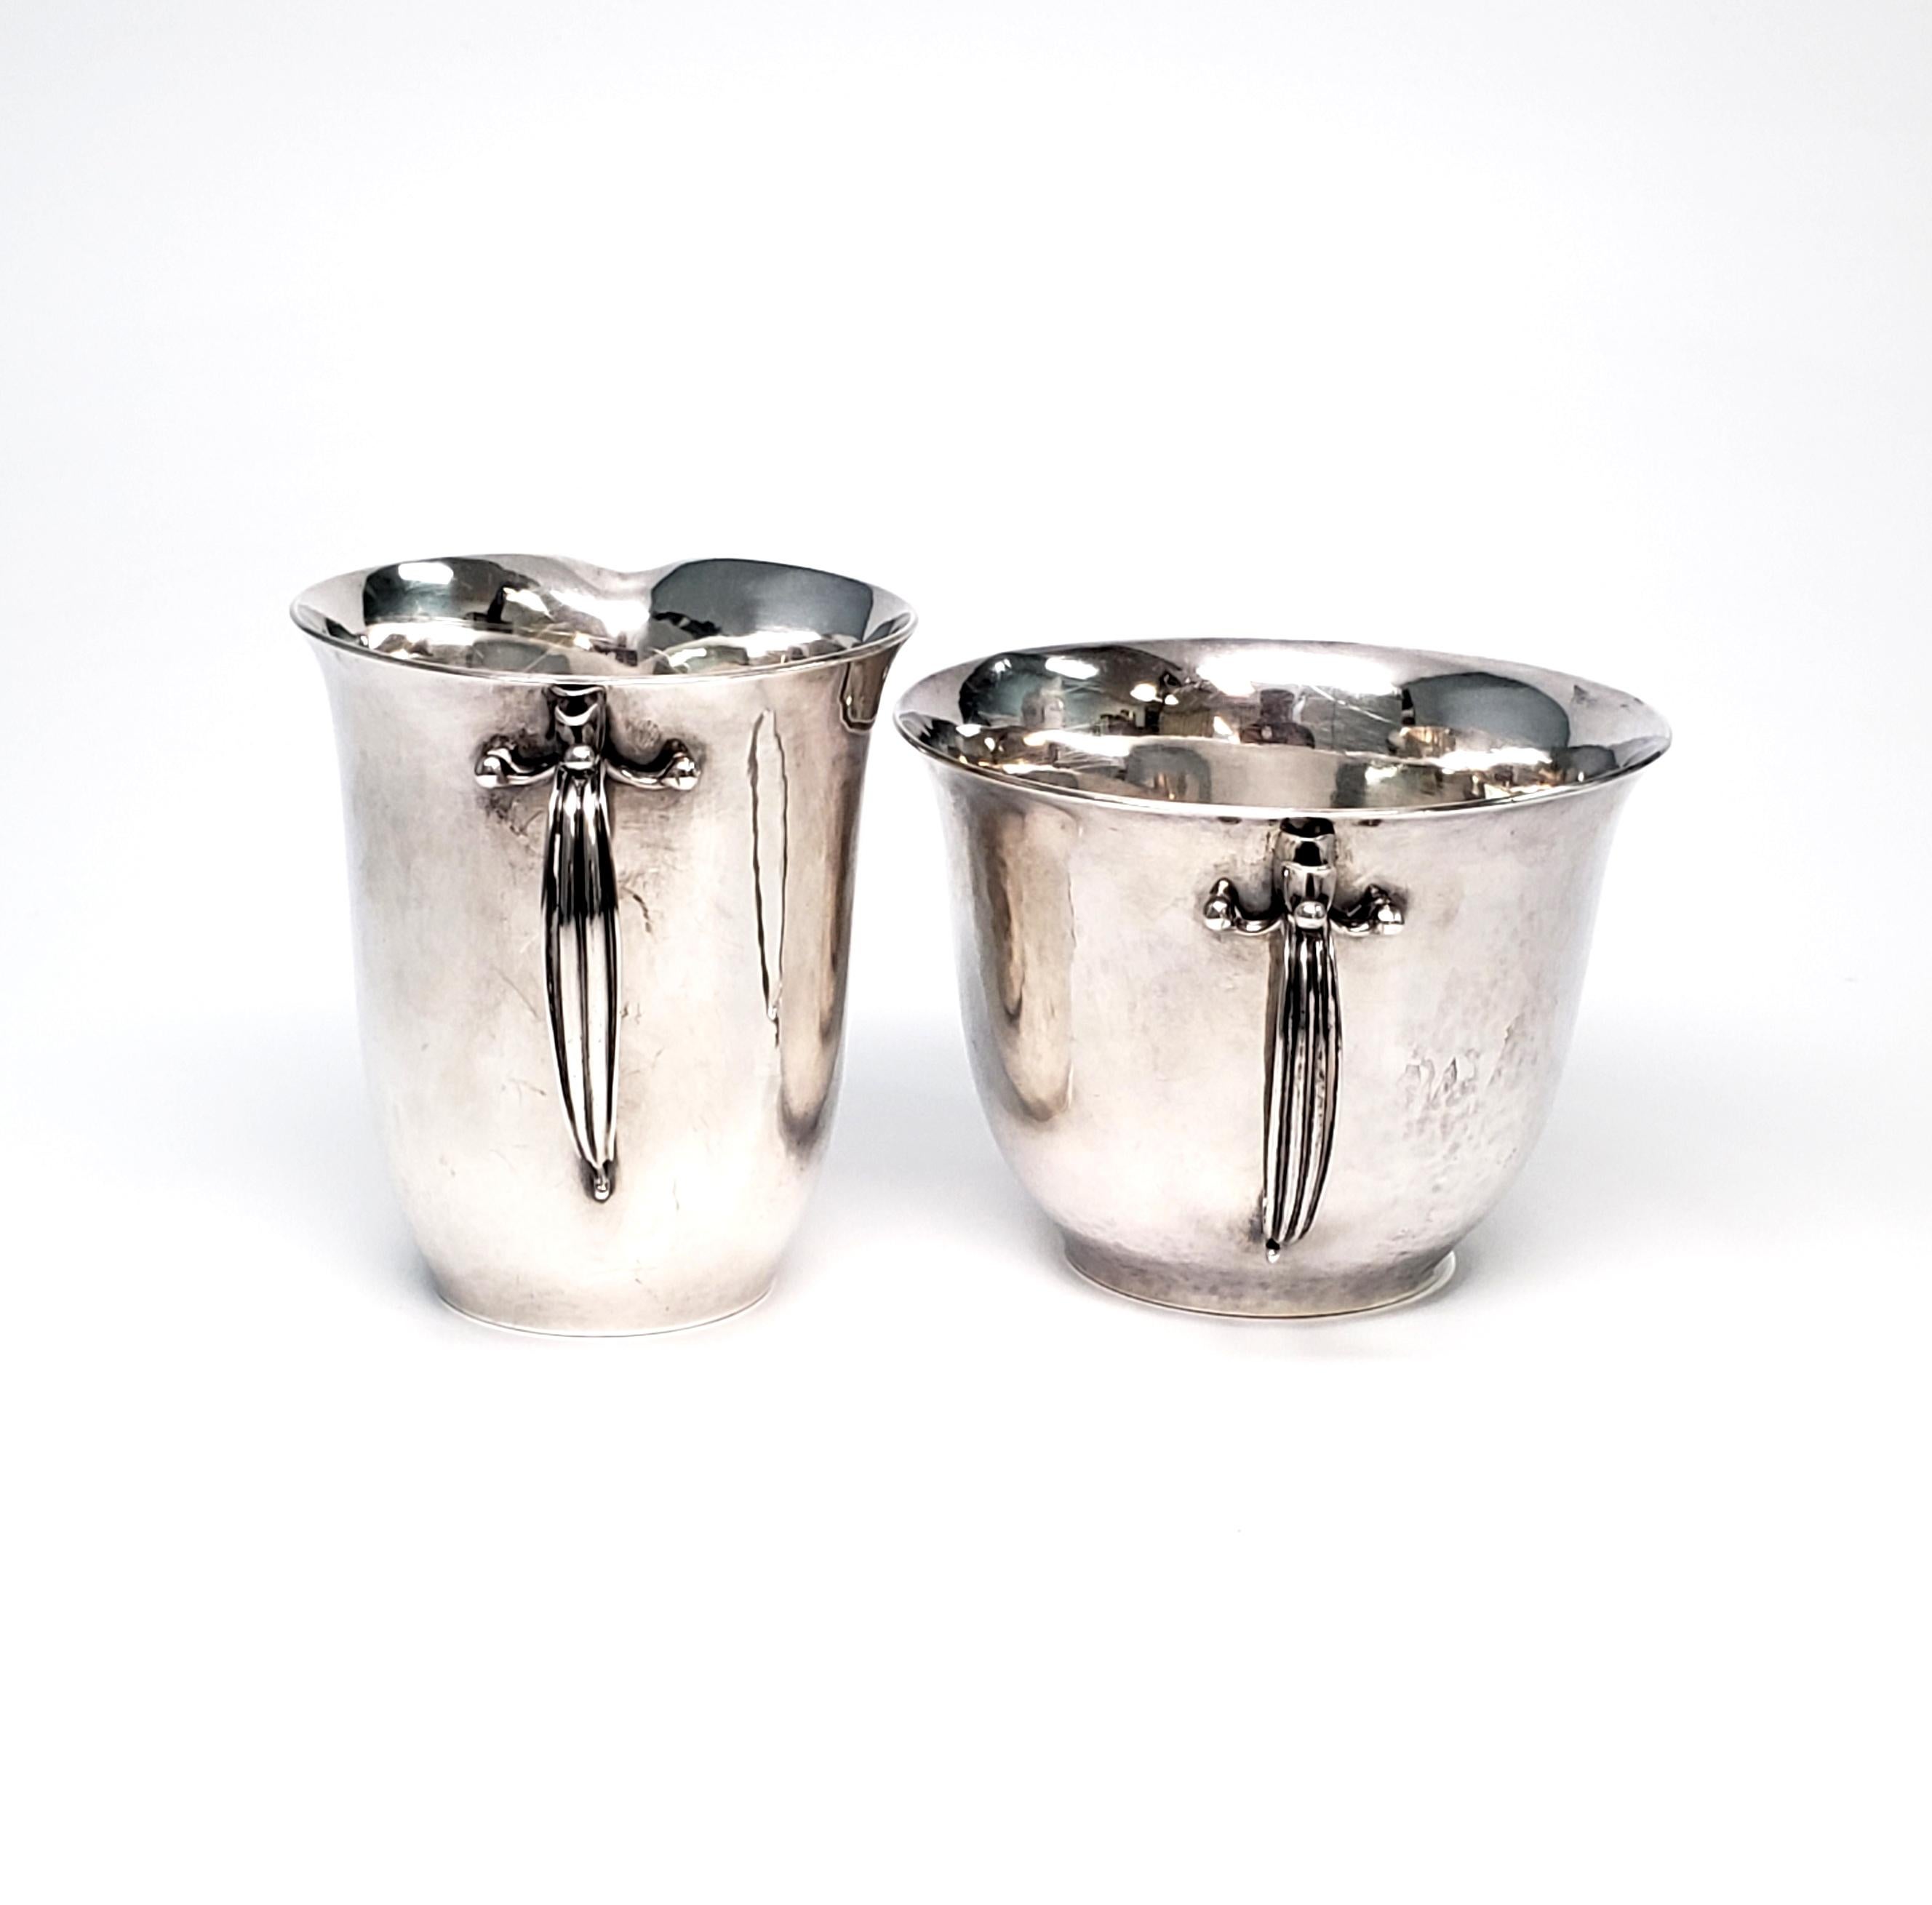 Vintage Georg Jensen sterling silver open creamer and sugar bowl set #456D, designed by Harald Nielsen (1892-1977) for Georg Jensen.

Designed by Harald Nielsen, one of Georg Jensen's original collaborators, these pieces feature a lightly hammered